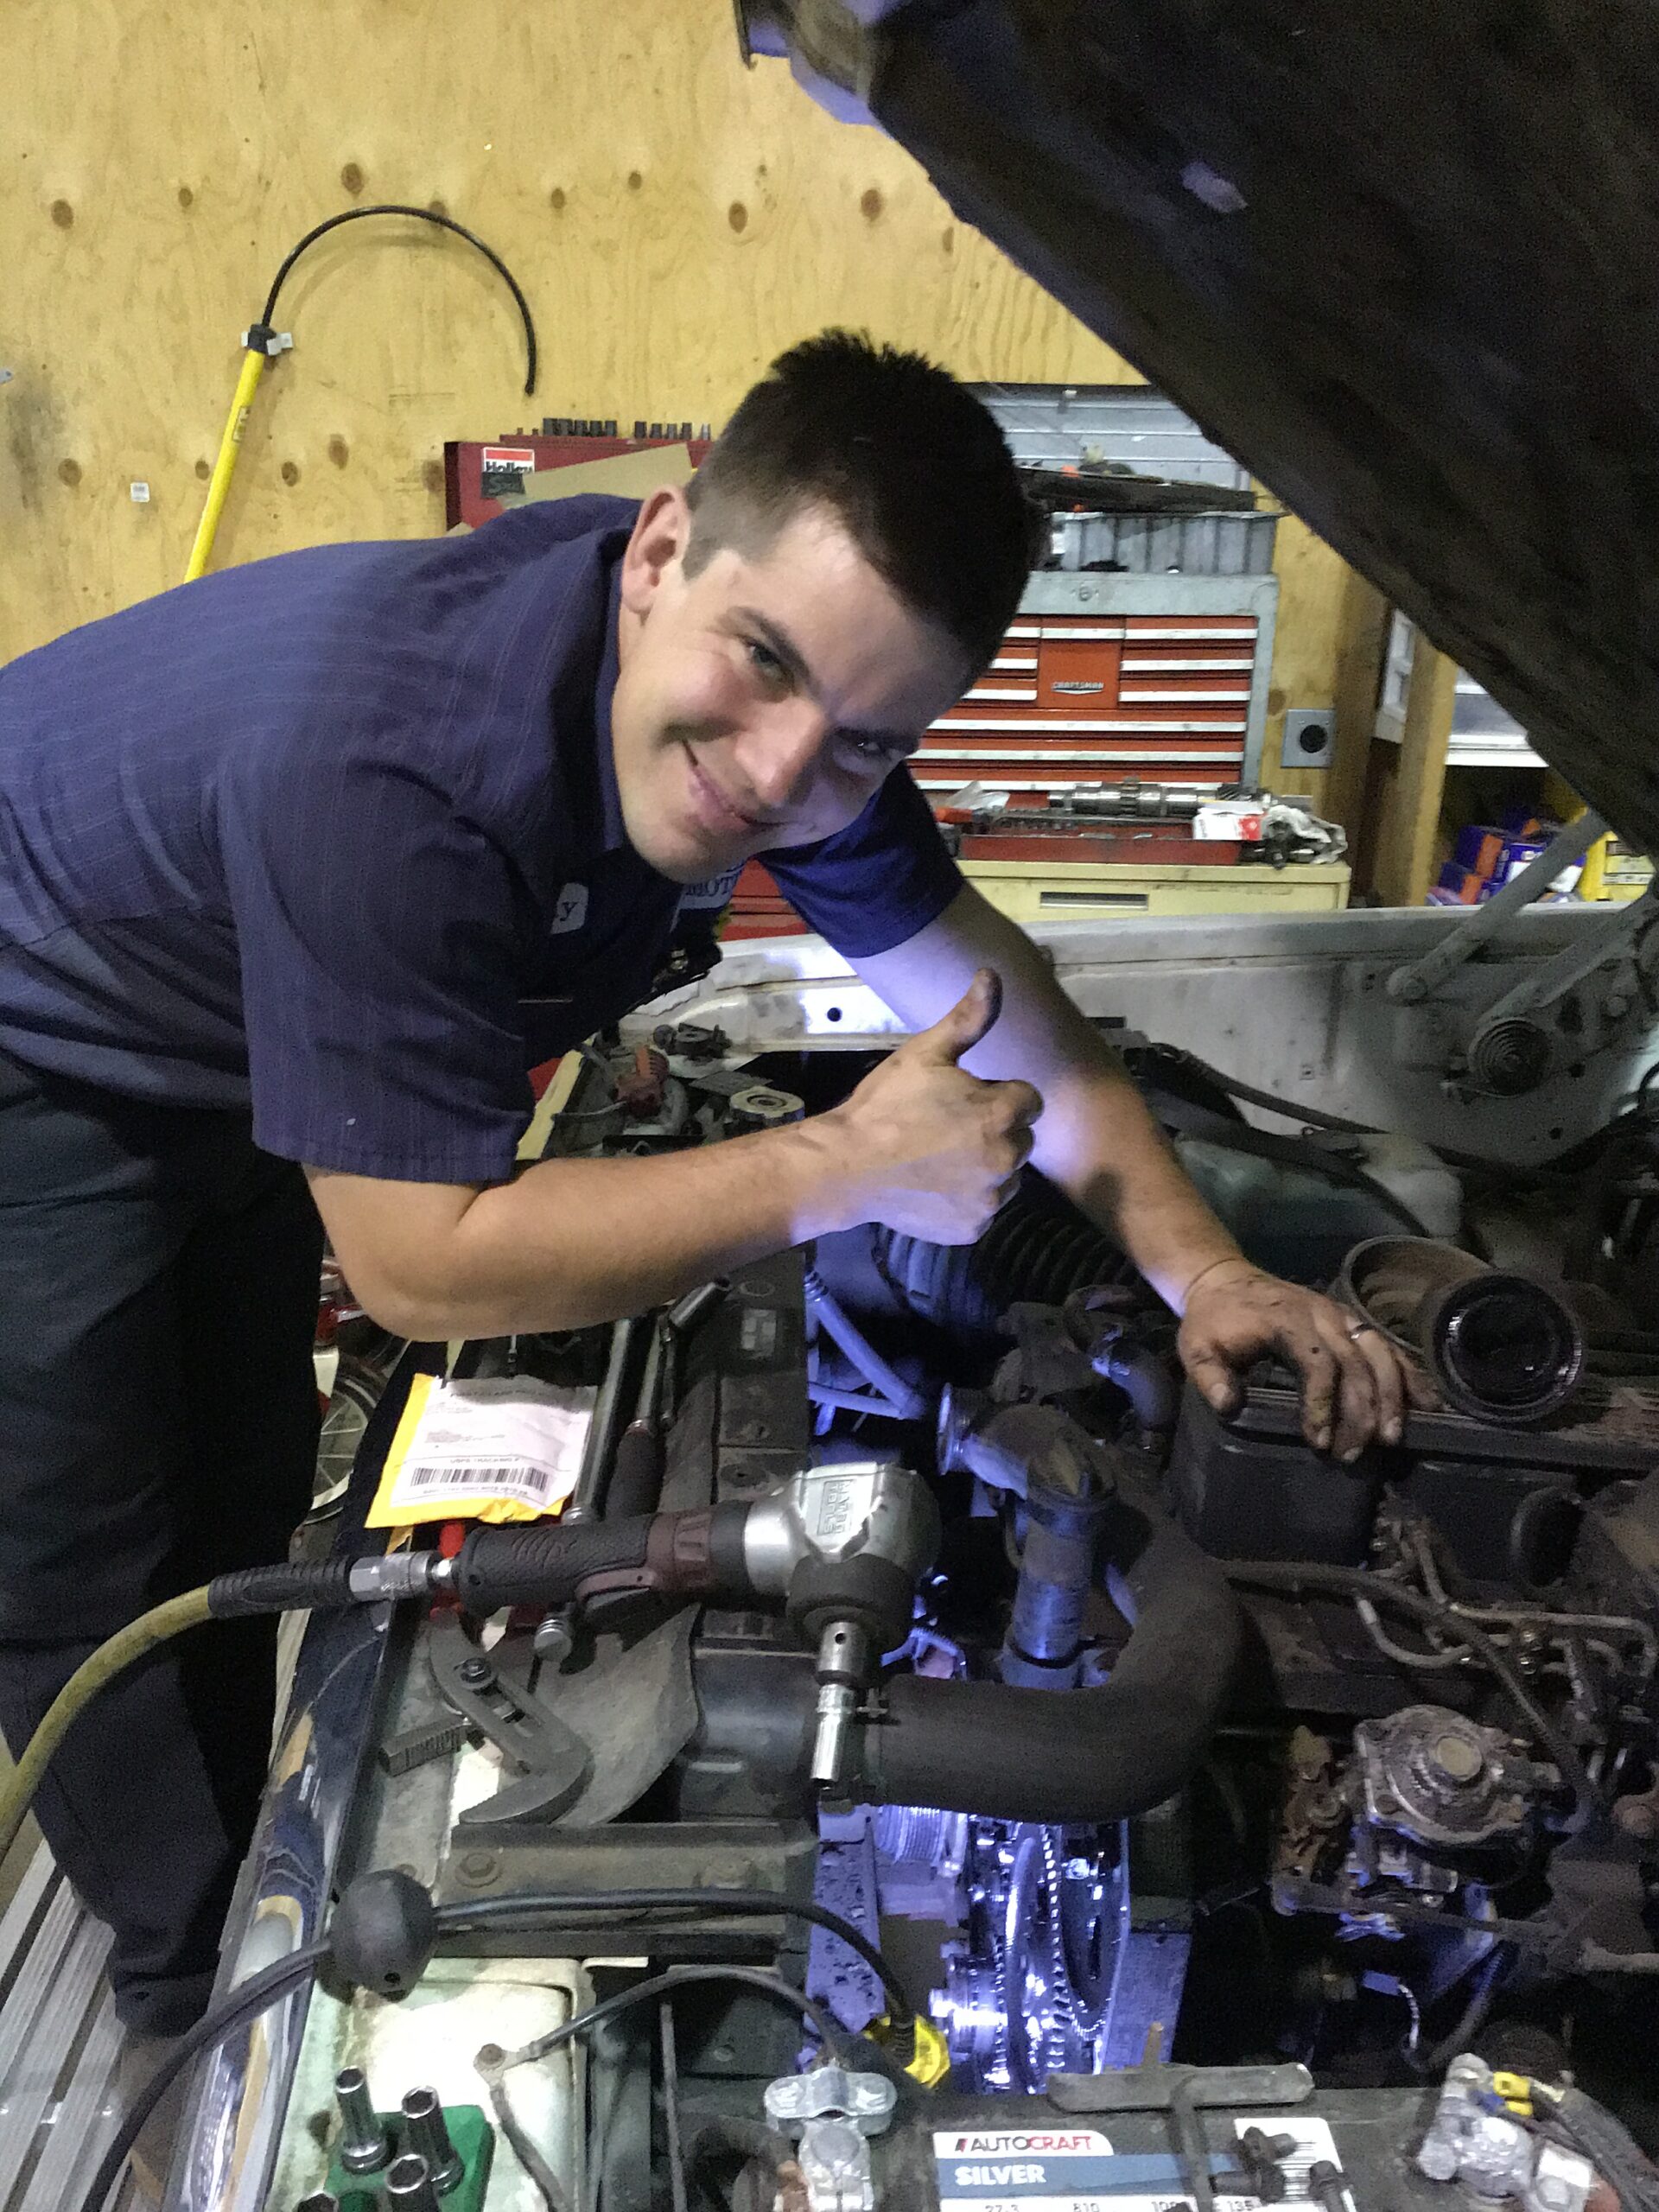 Timothy, a mechanic at Scofield Automotive repair in Roseburg, Or working under the hood of a car